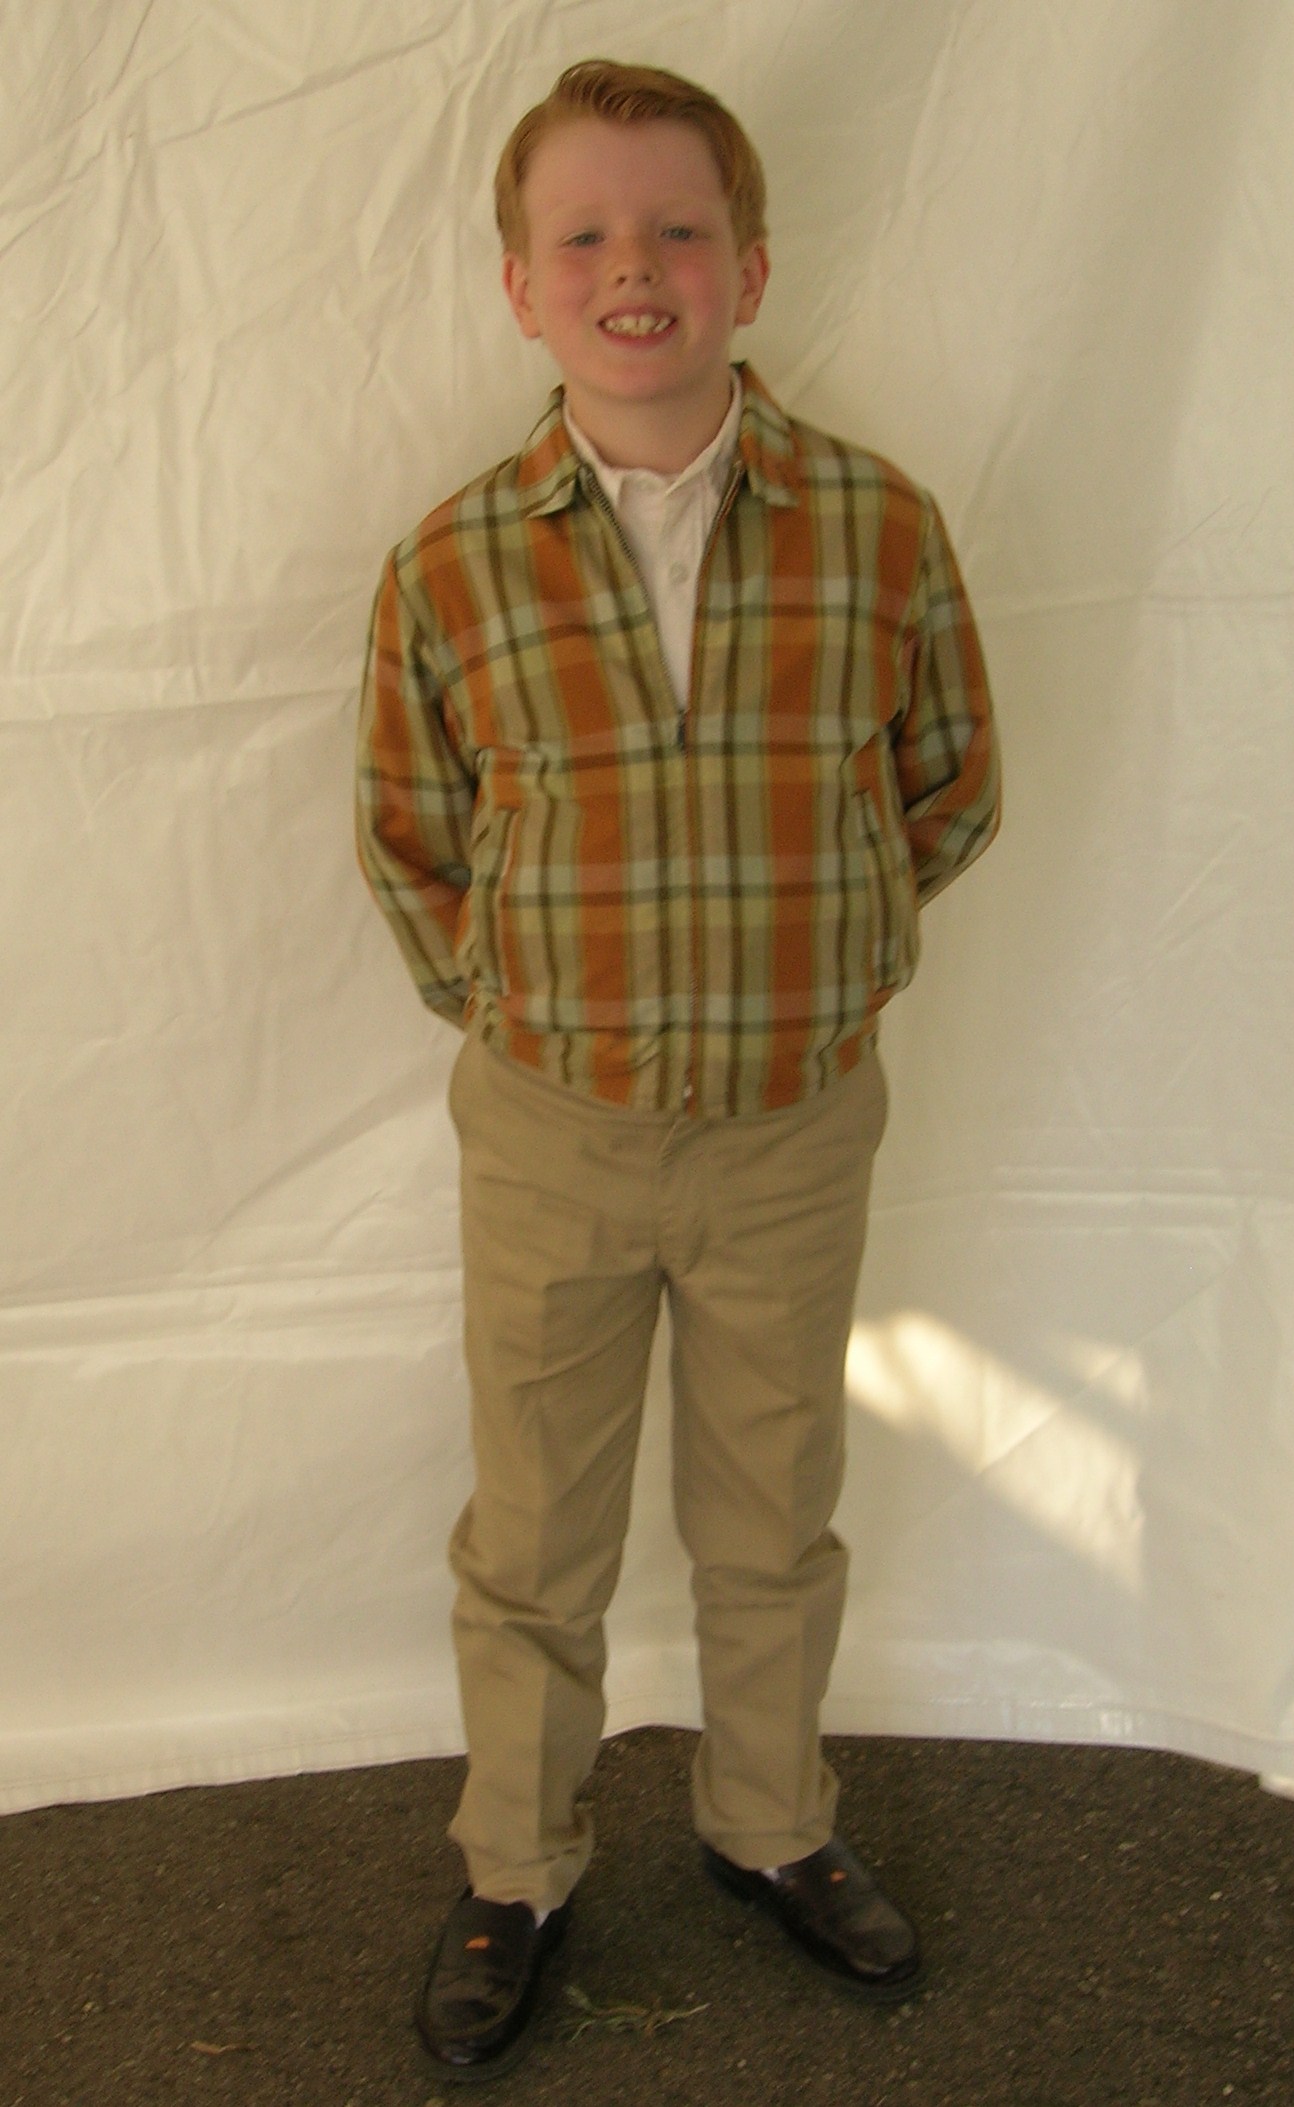 Jacob Warner as a classmate on the set of feature film 